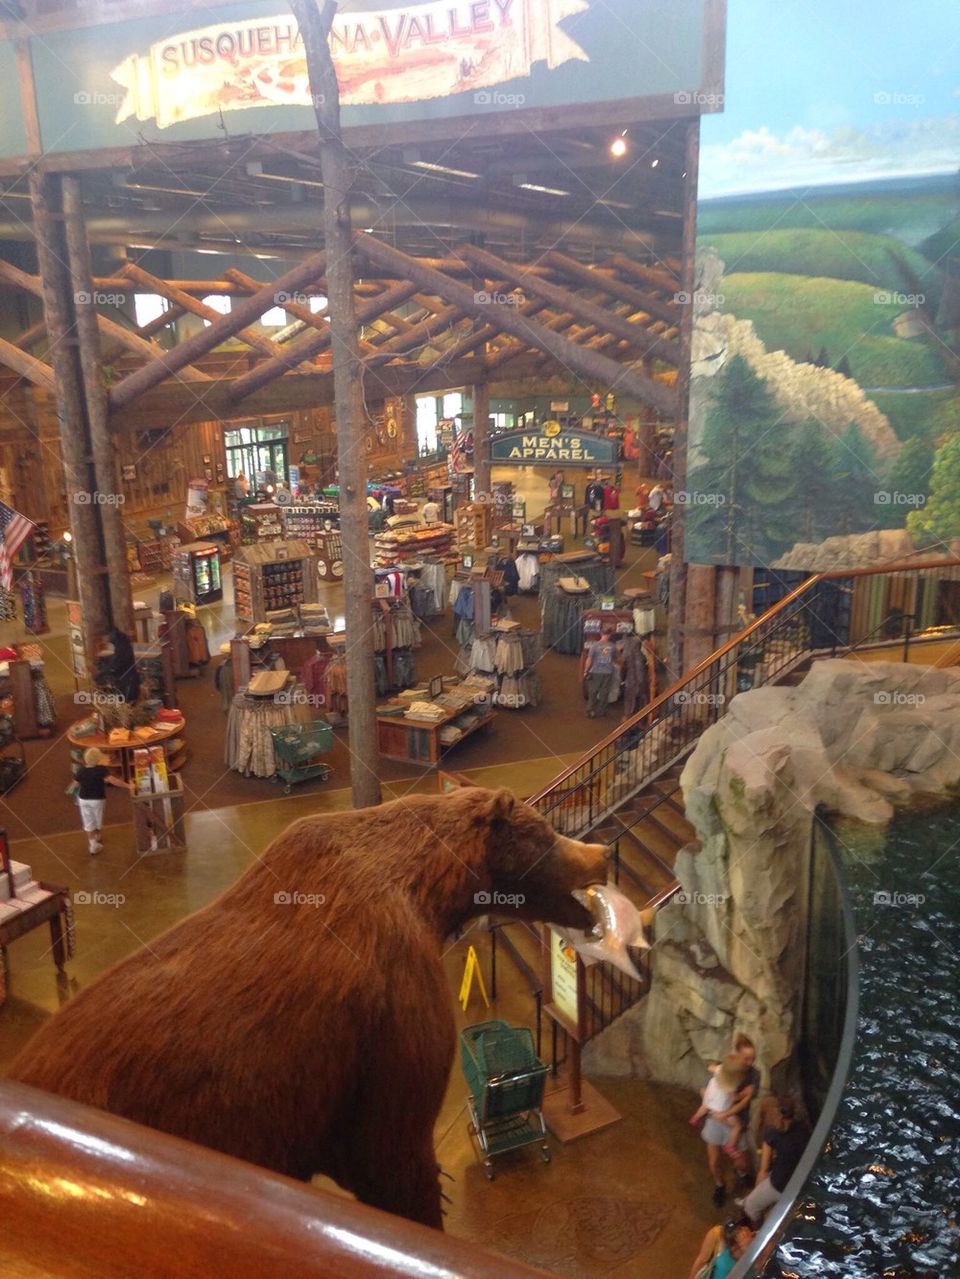 Just another trip to Bass Pro